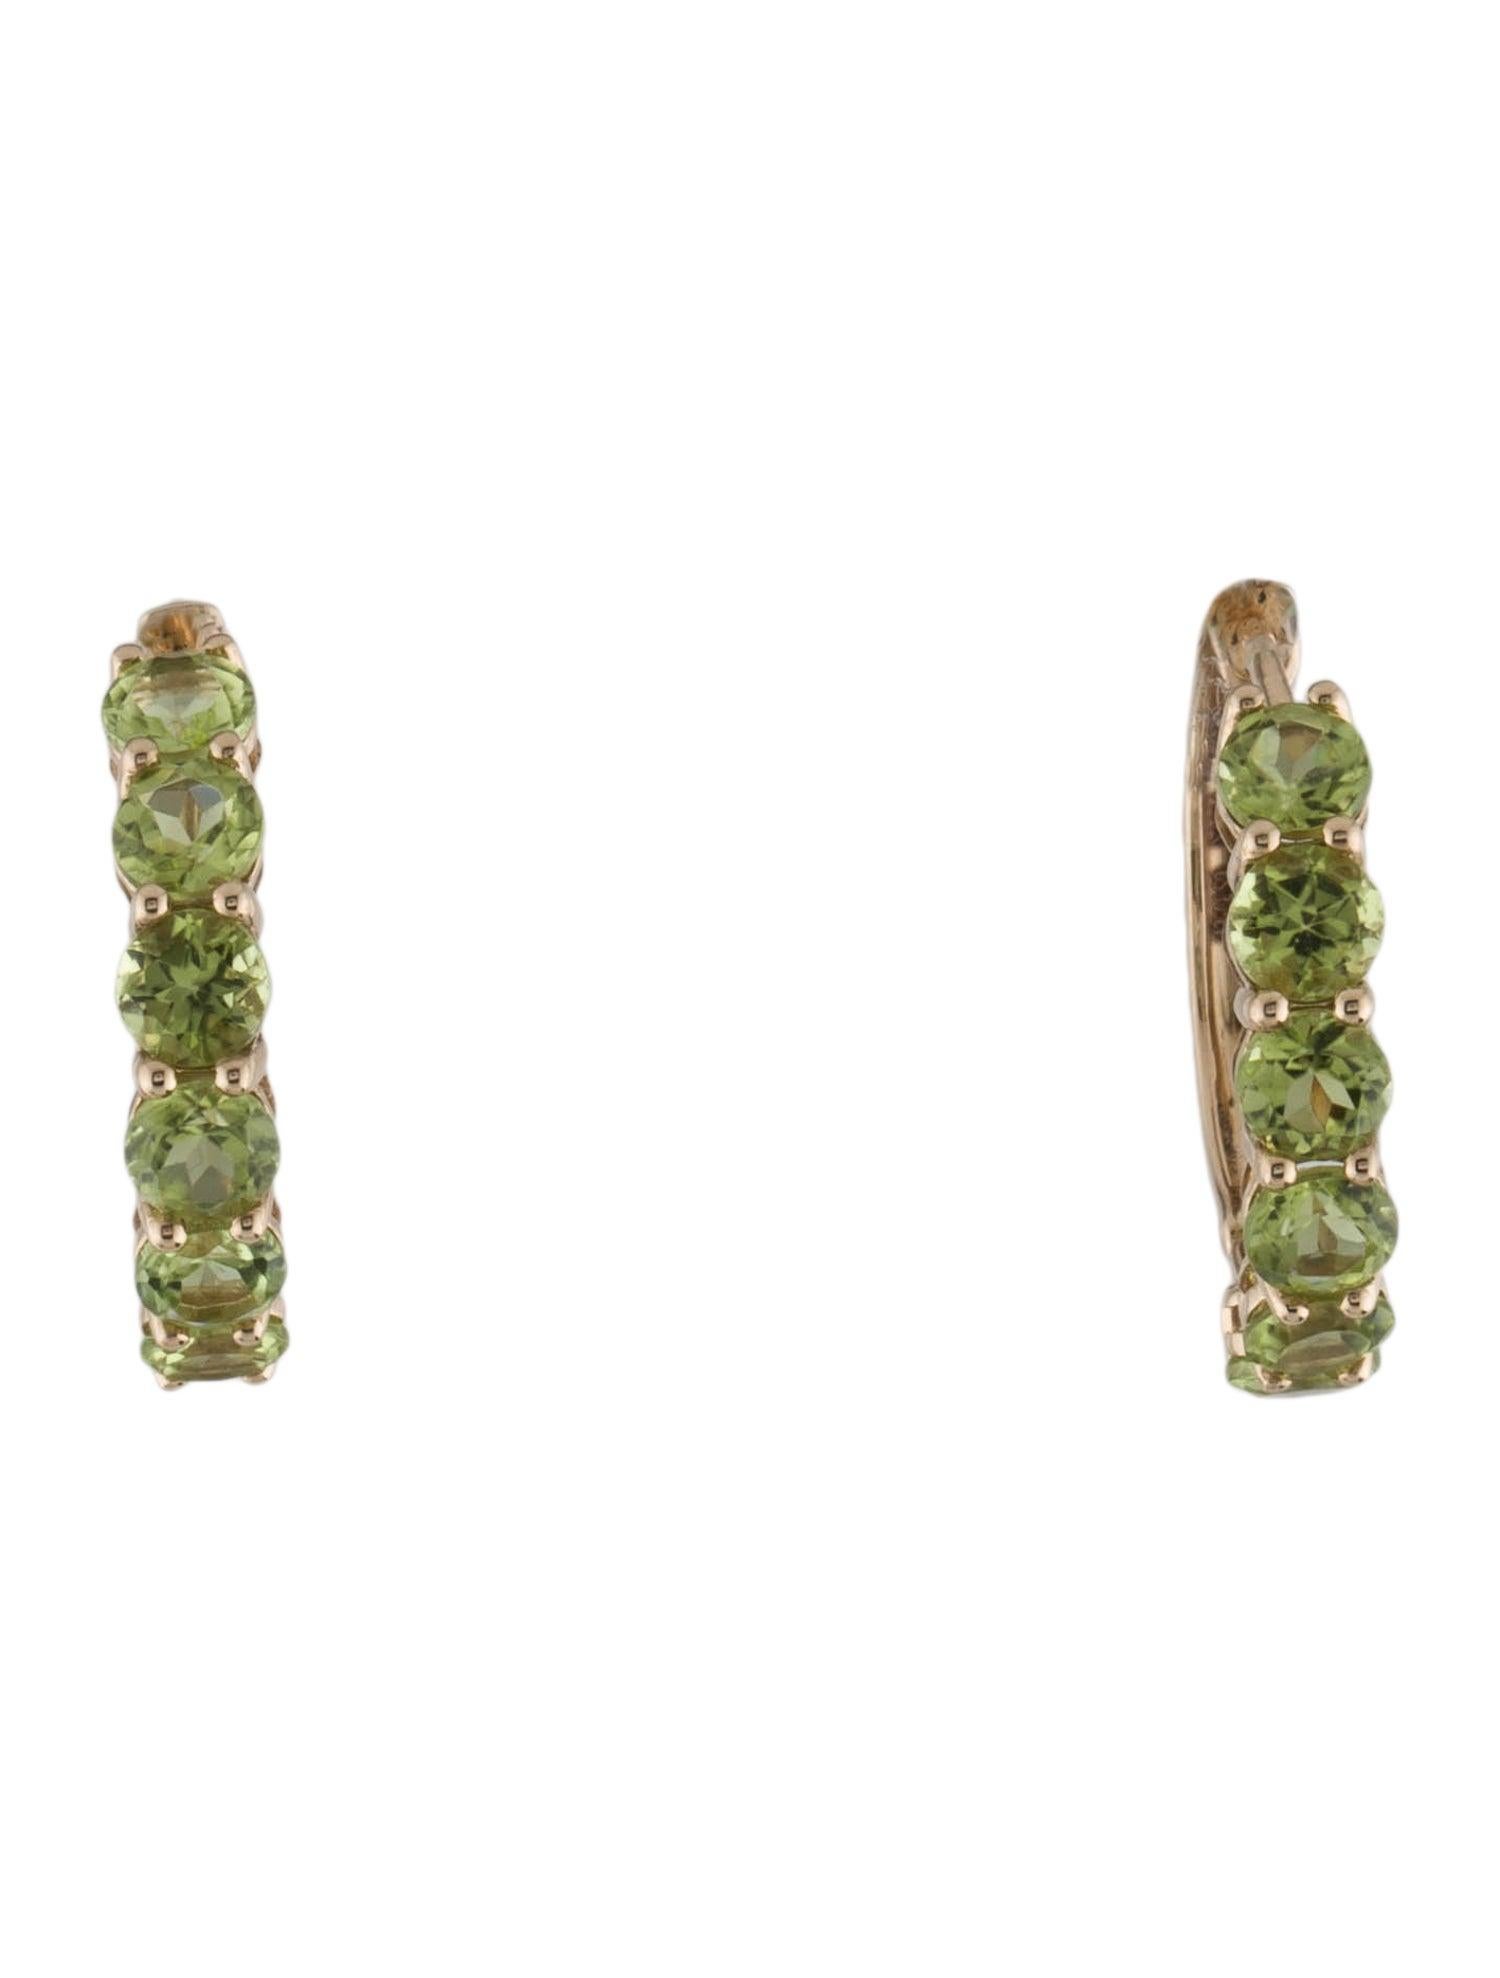 14K Peridot Huggie Earrings - 3.75ctw, Elegant Gemstone Jewelry, Timeless Style In New Condition For Sale In Holtsville, NY